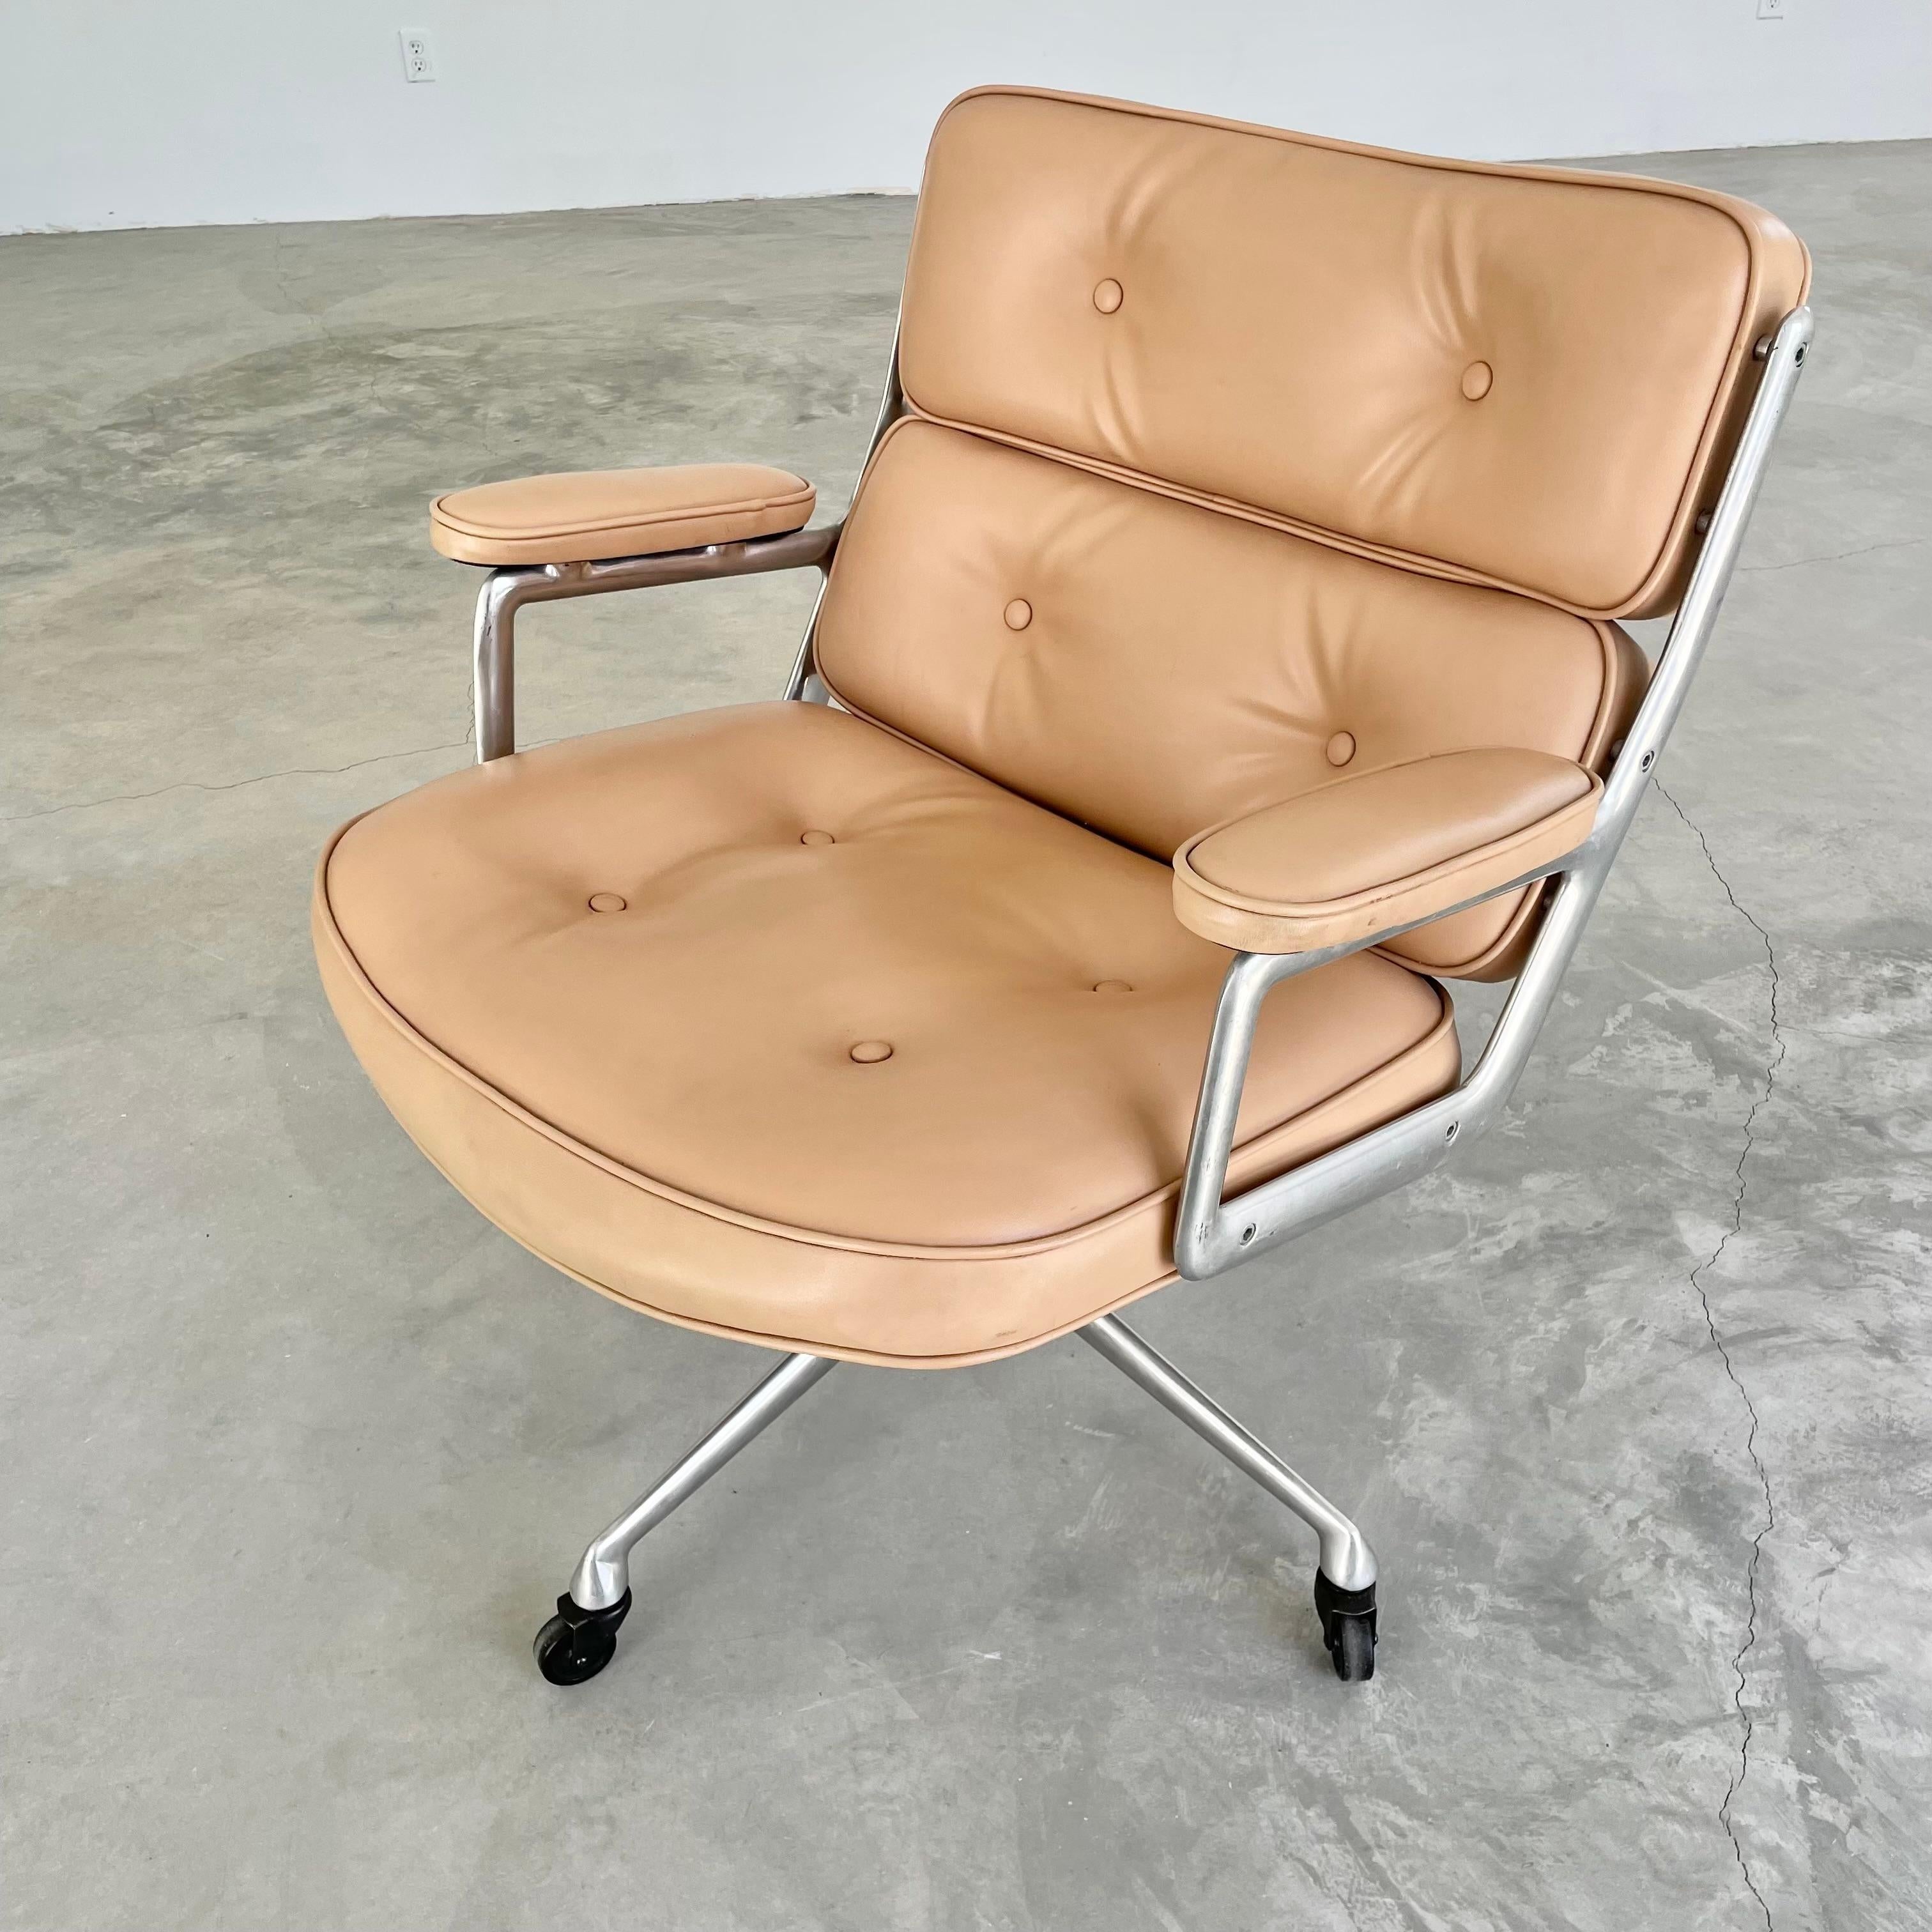 Vintage Eames Time Life Lobby Chair in Camel 4